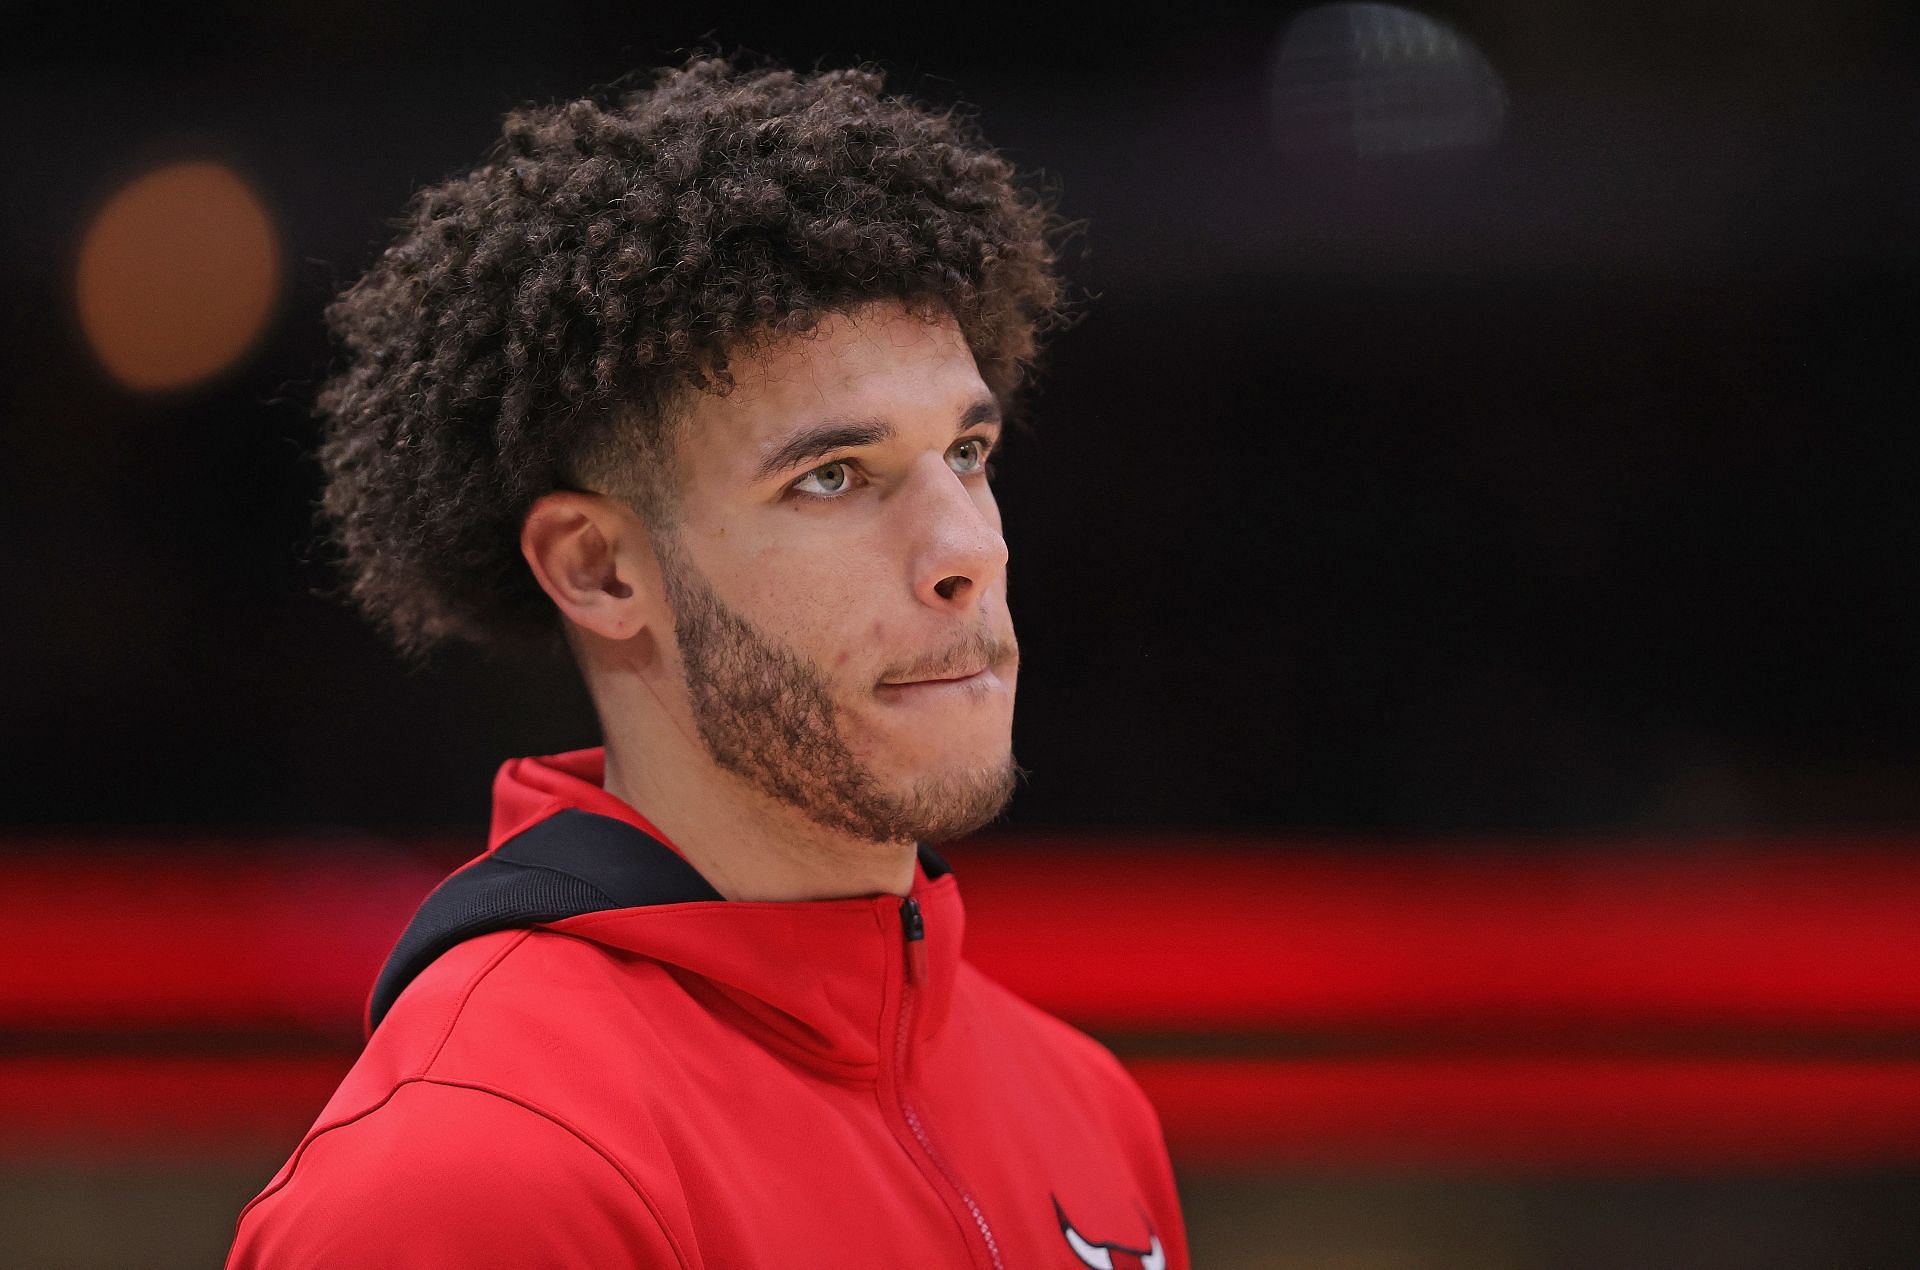 Lonzo Ball warms up ahead of a Chicago Bulls game